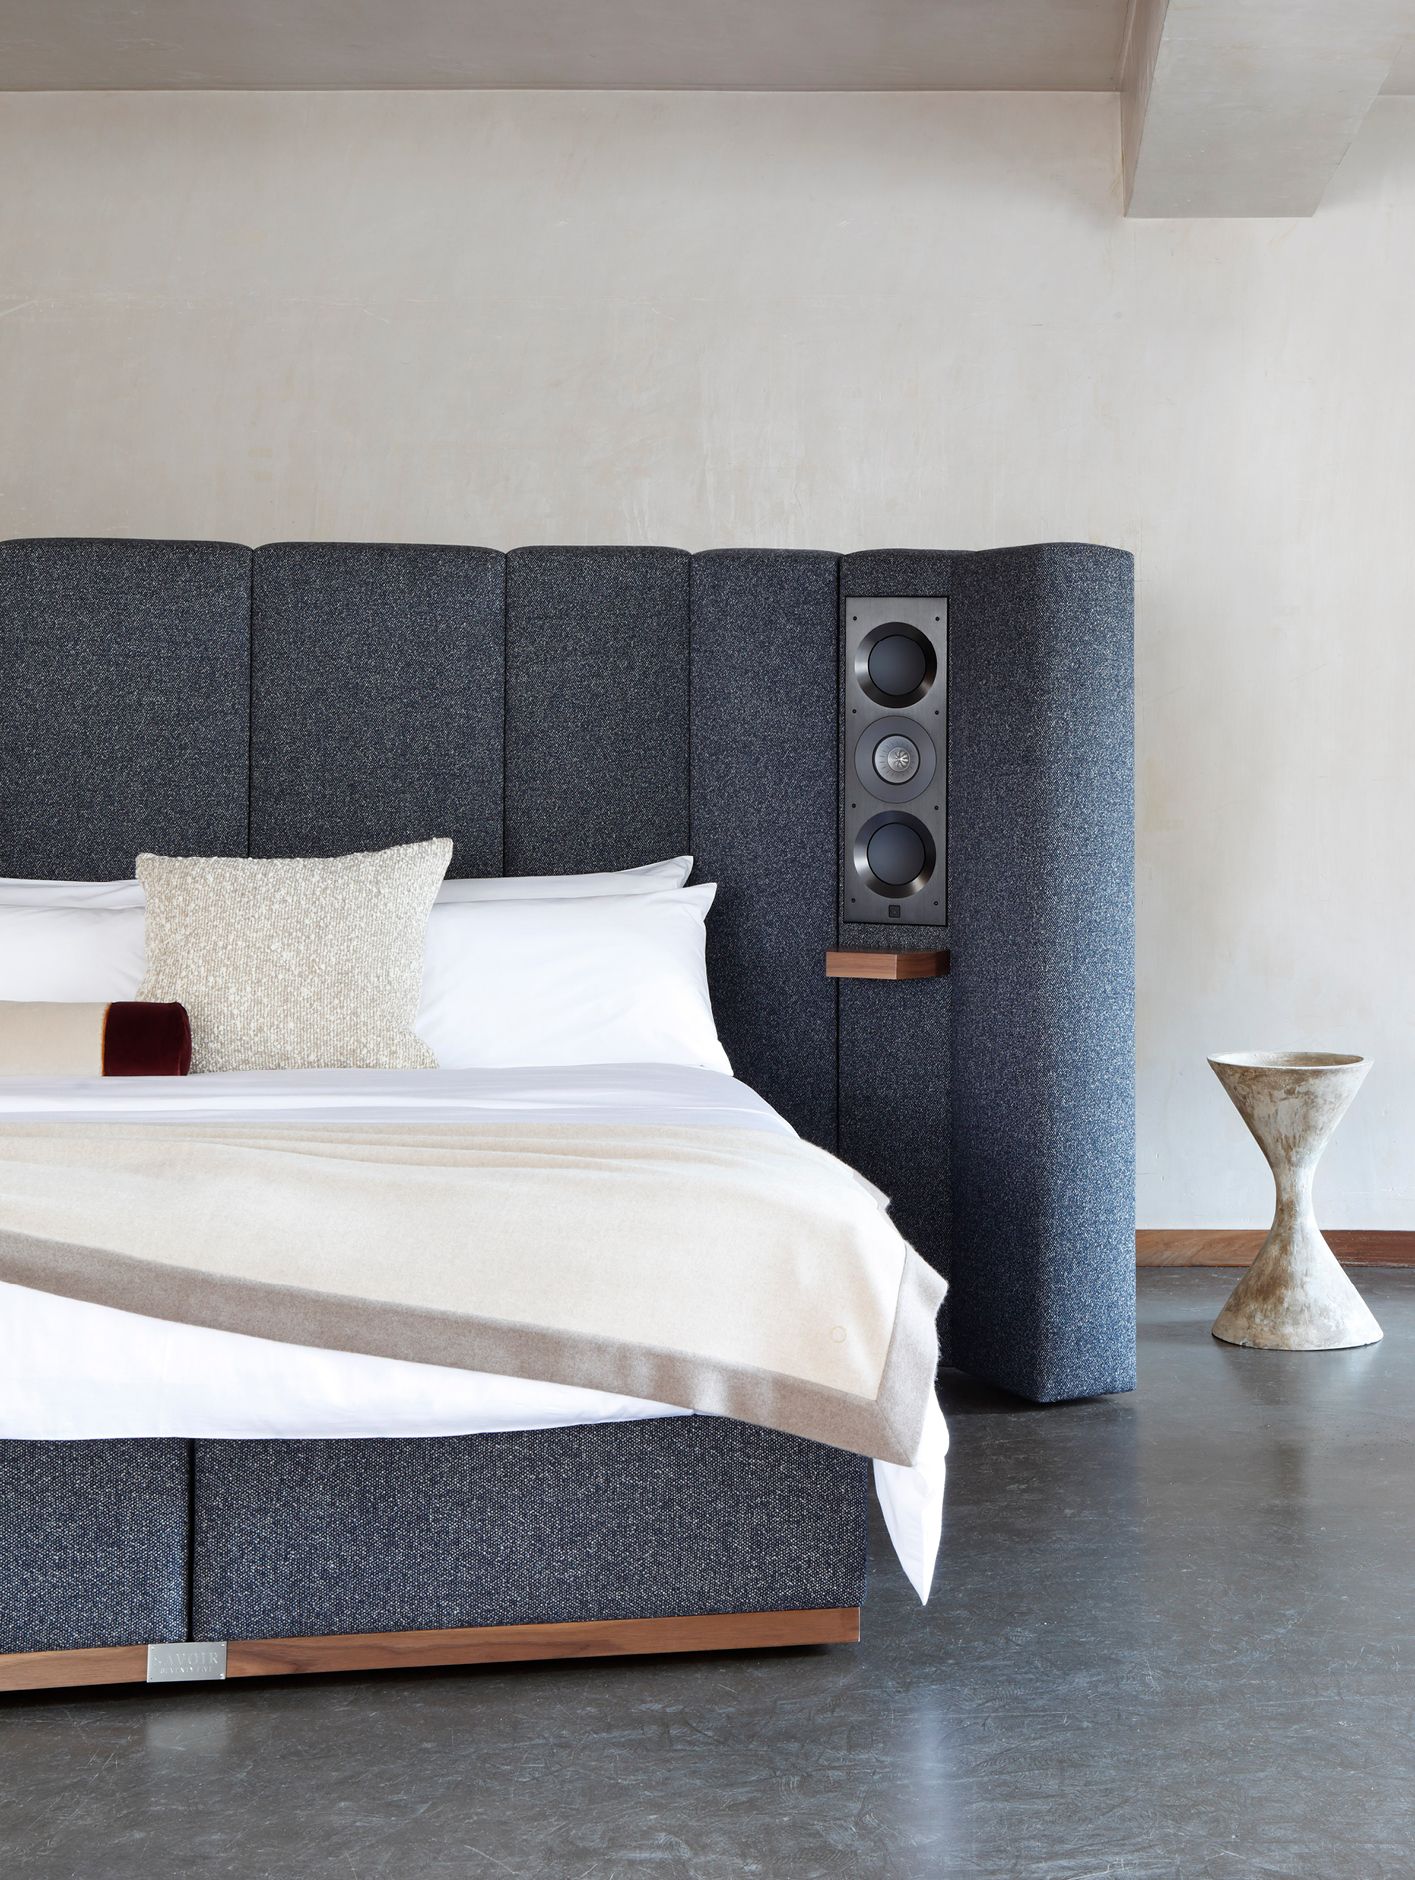 This music-based iteration of Savoir's iconic No. 2 bed is dressed in luxurious contrasting fabrics